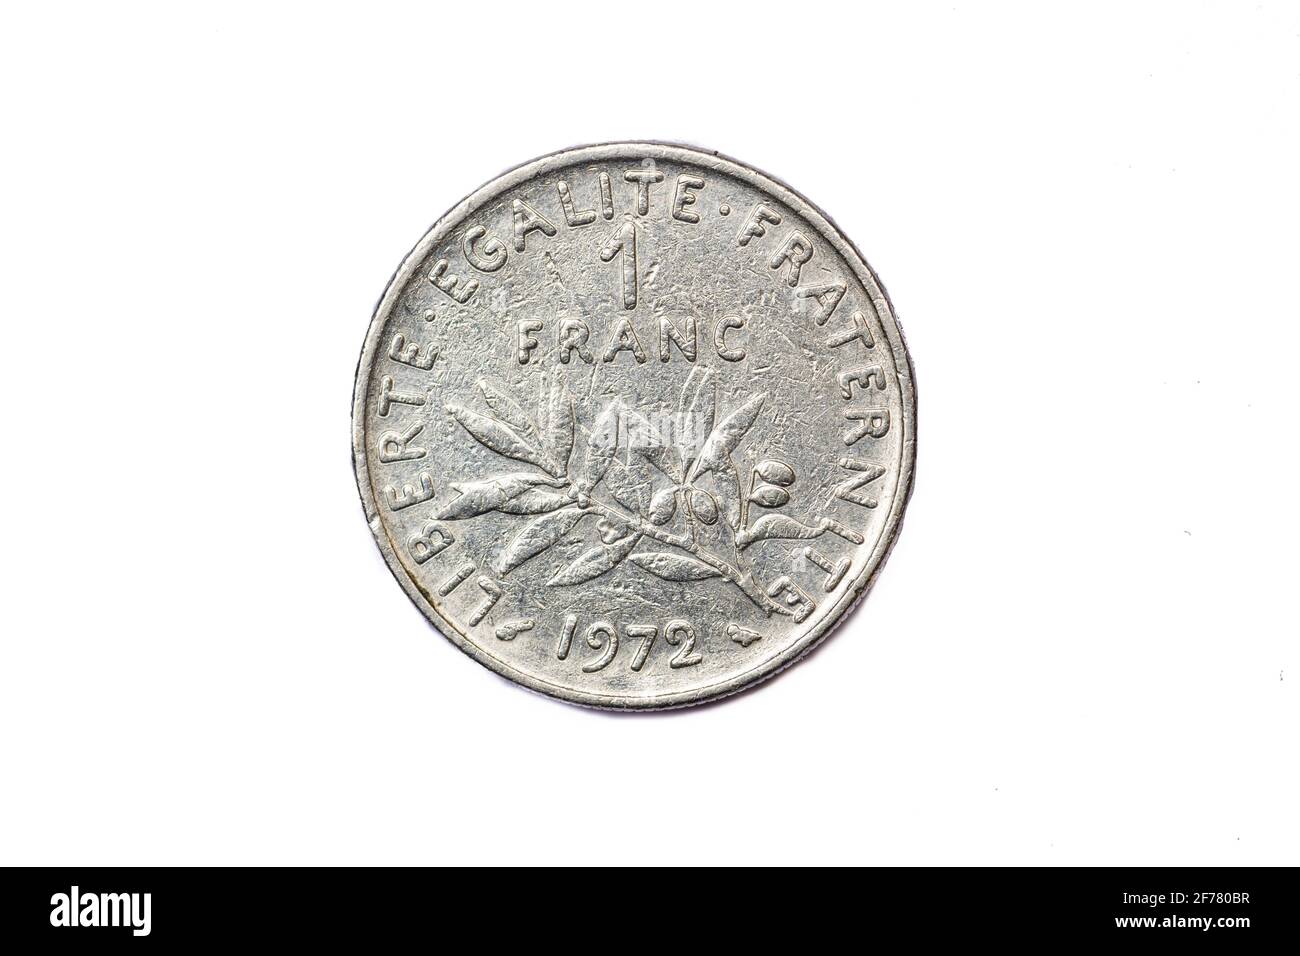 France, old official money, francs Stock Photo